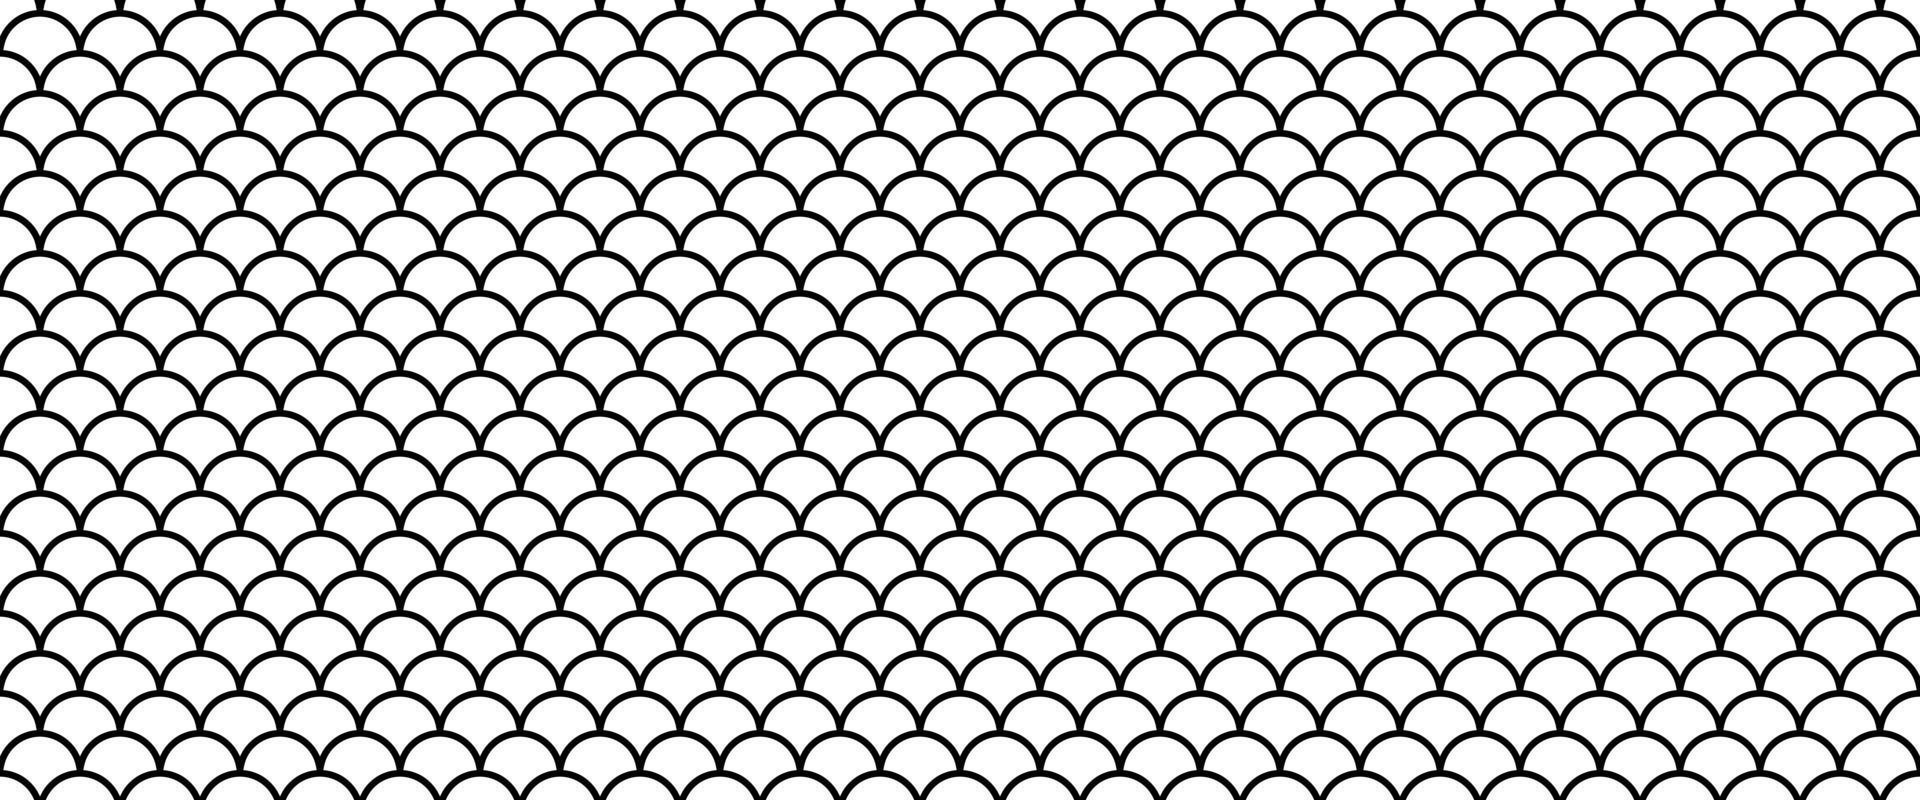 outline fish scale seamless pattern.hand drawing fish skin pattern vector